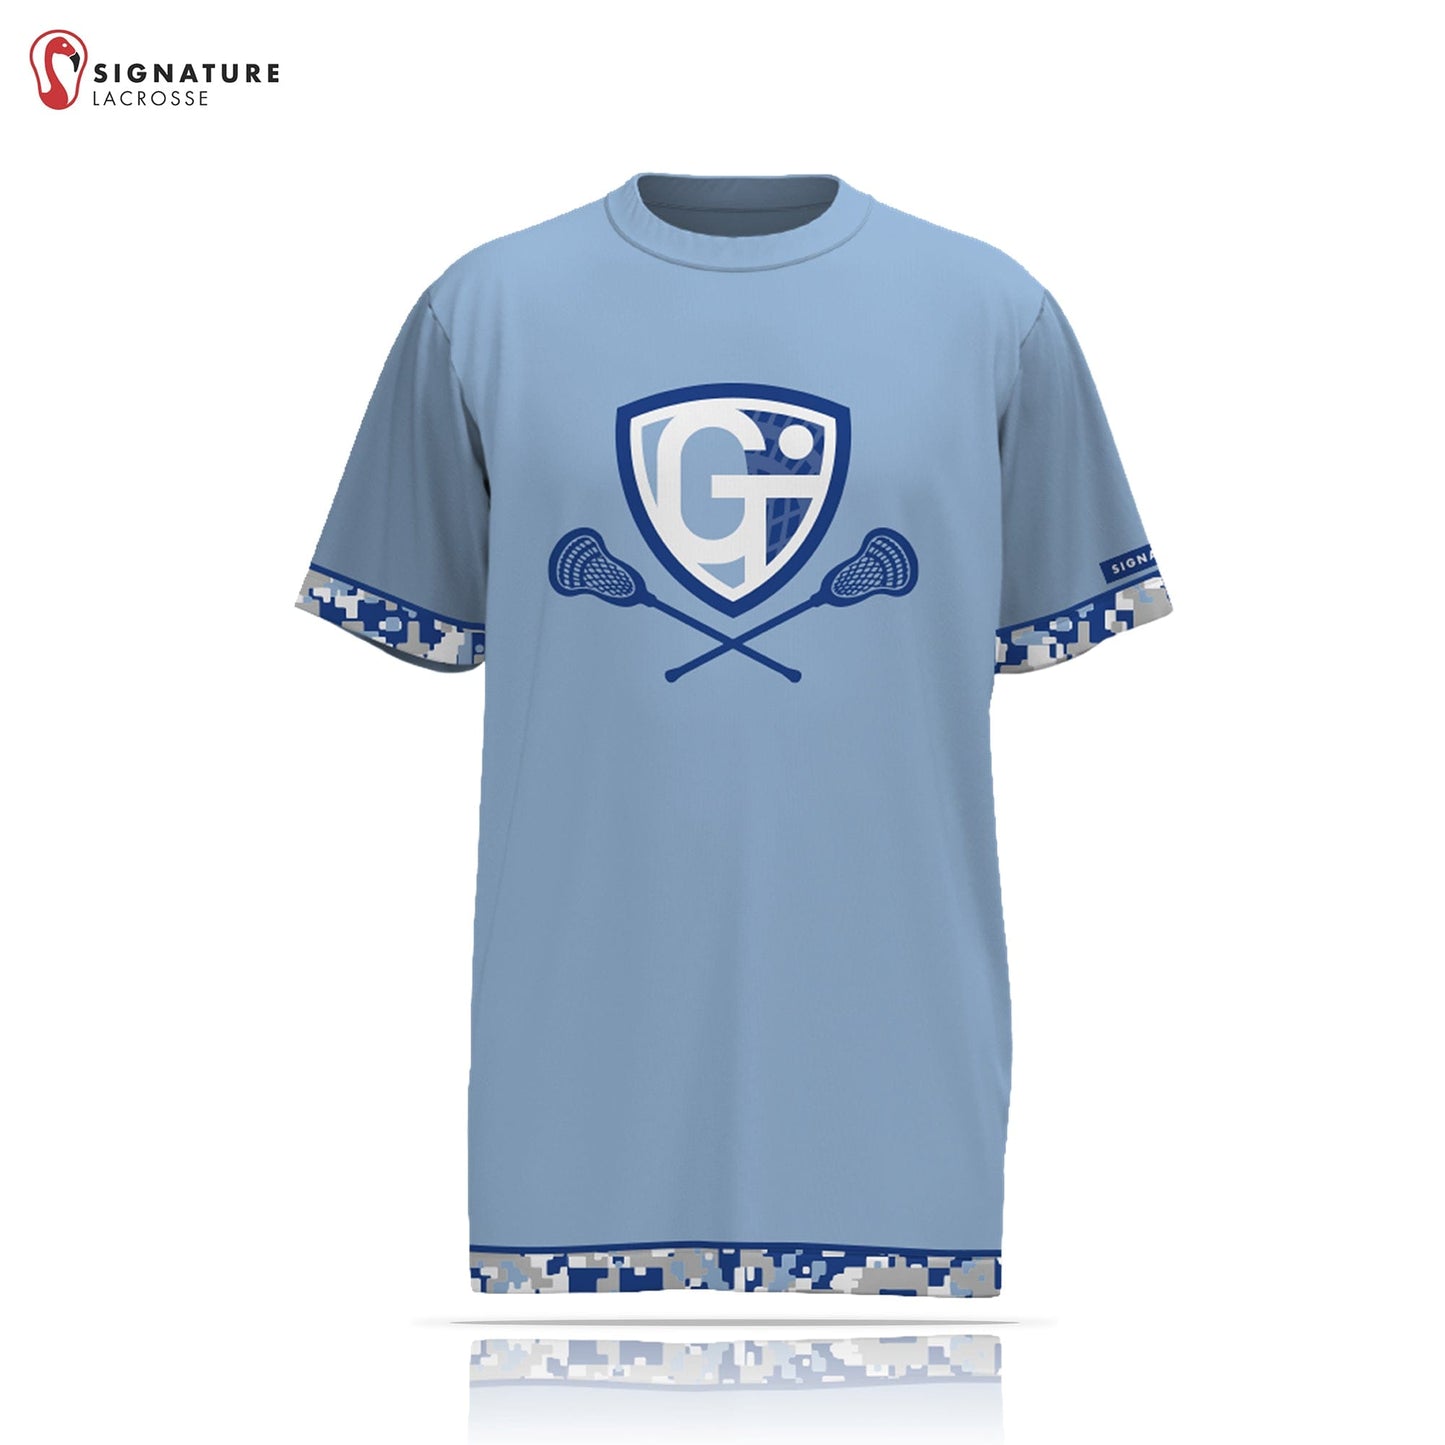 Georgetown-Triton Youth Lacrosse Player Short Sleeve Shooting Shirt: 5-6 Signature Lacrosse